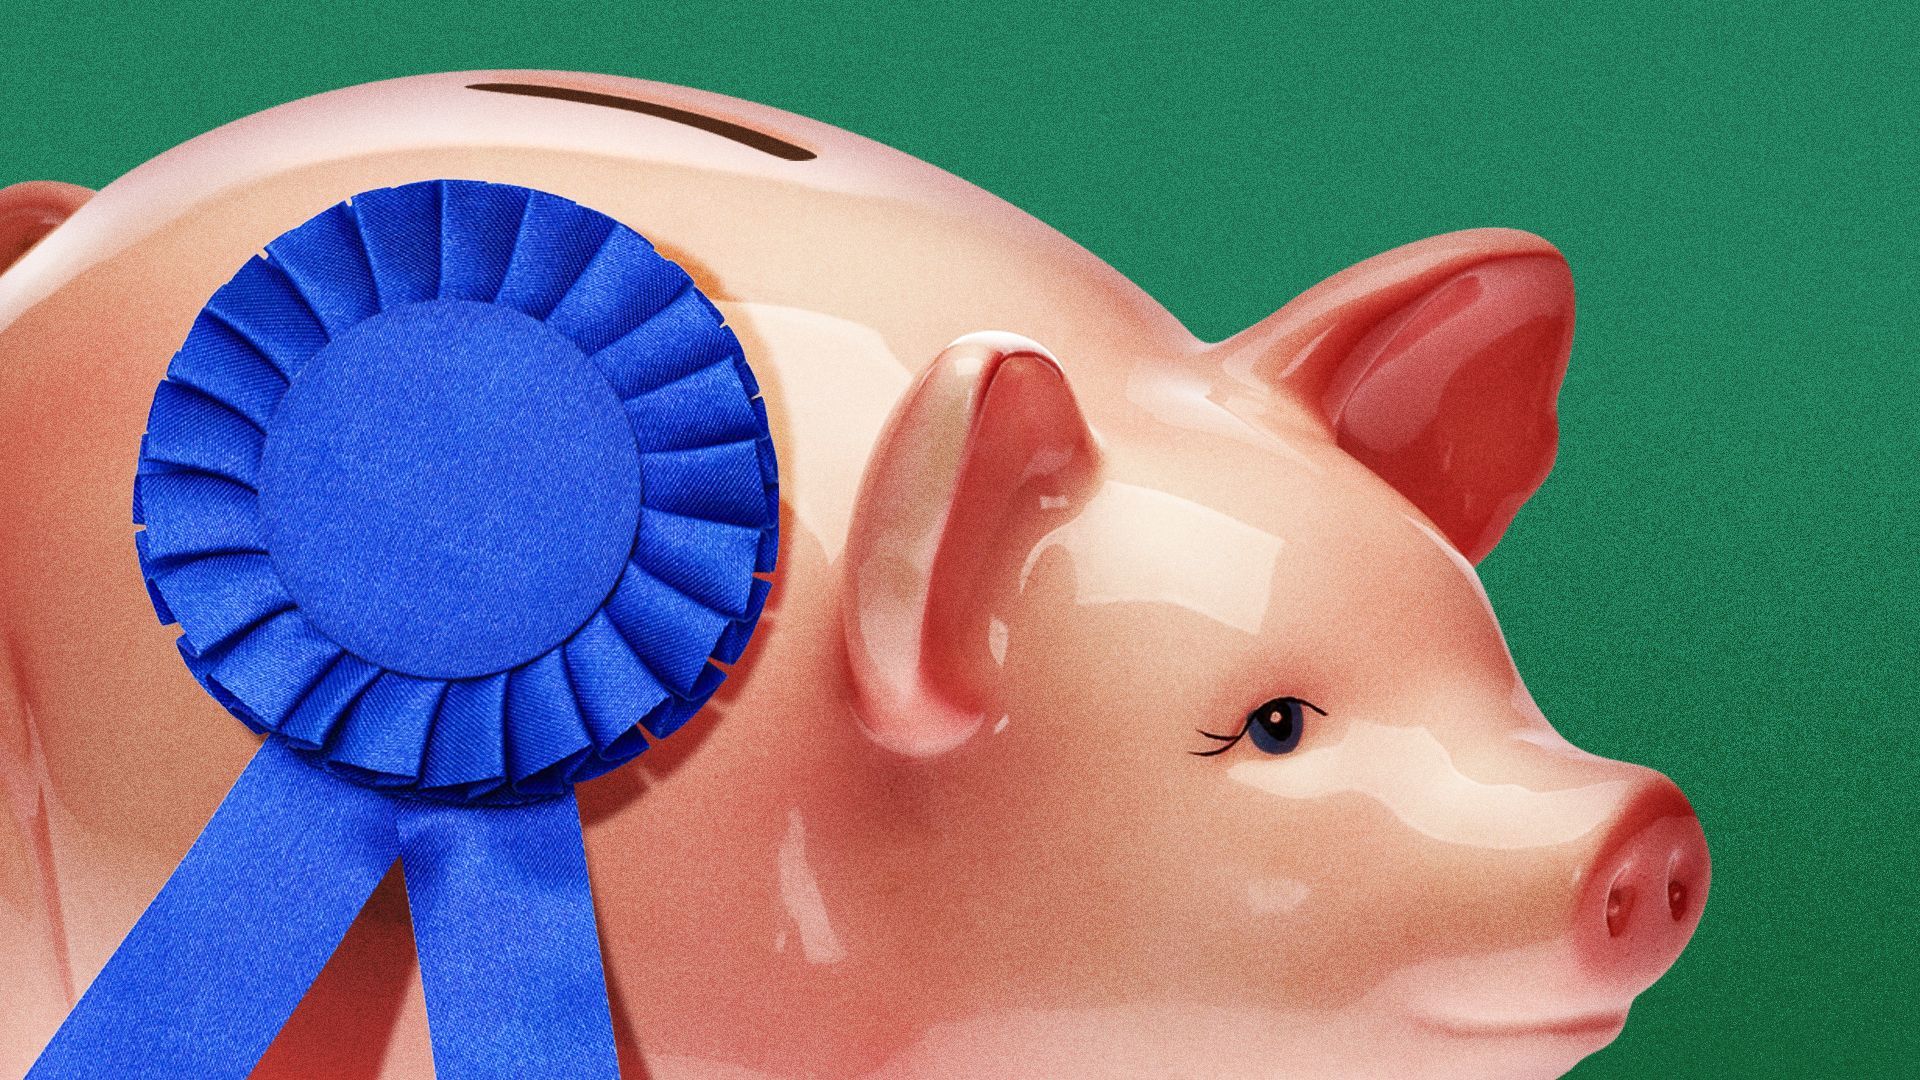 Illustration of a piggy bank with a blue ribbon, as if it is a prize pig. 